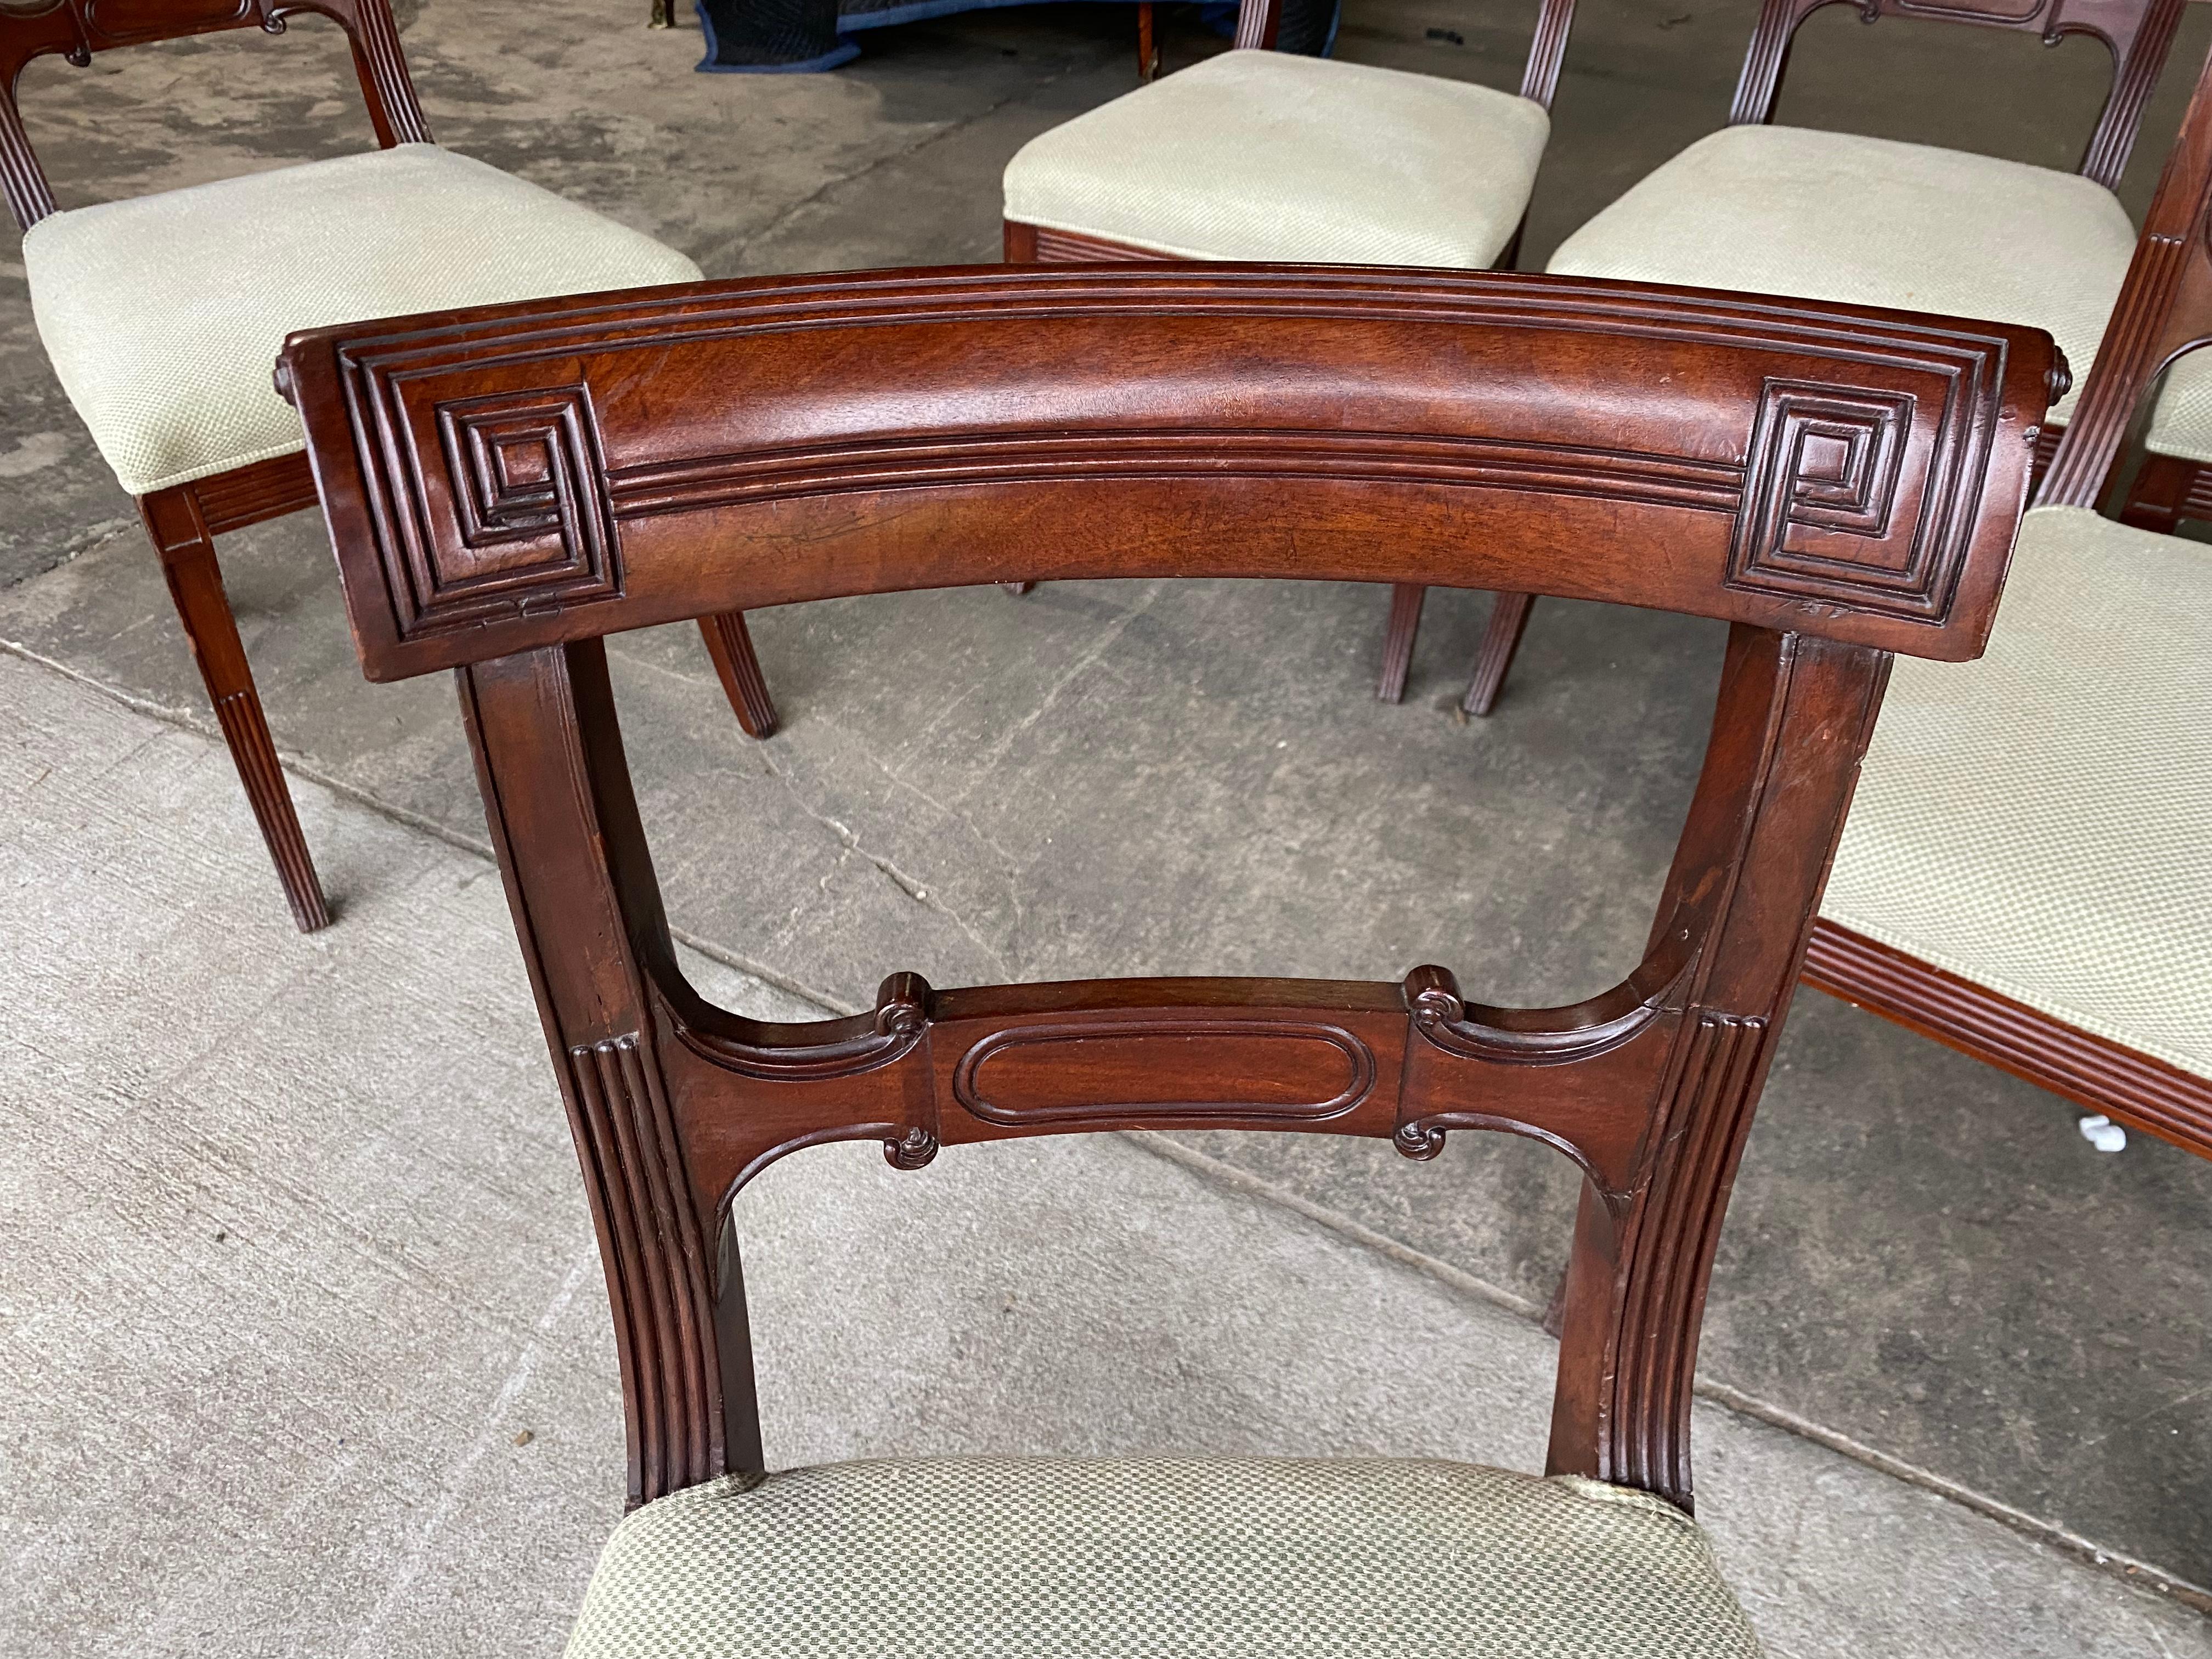 Set of 8 19th Century English Mahogany Side Chairs with Greek Key and Saber Legs For Sale 5